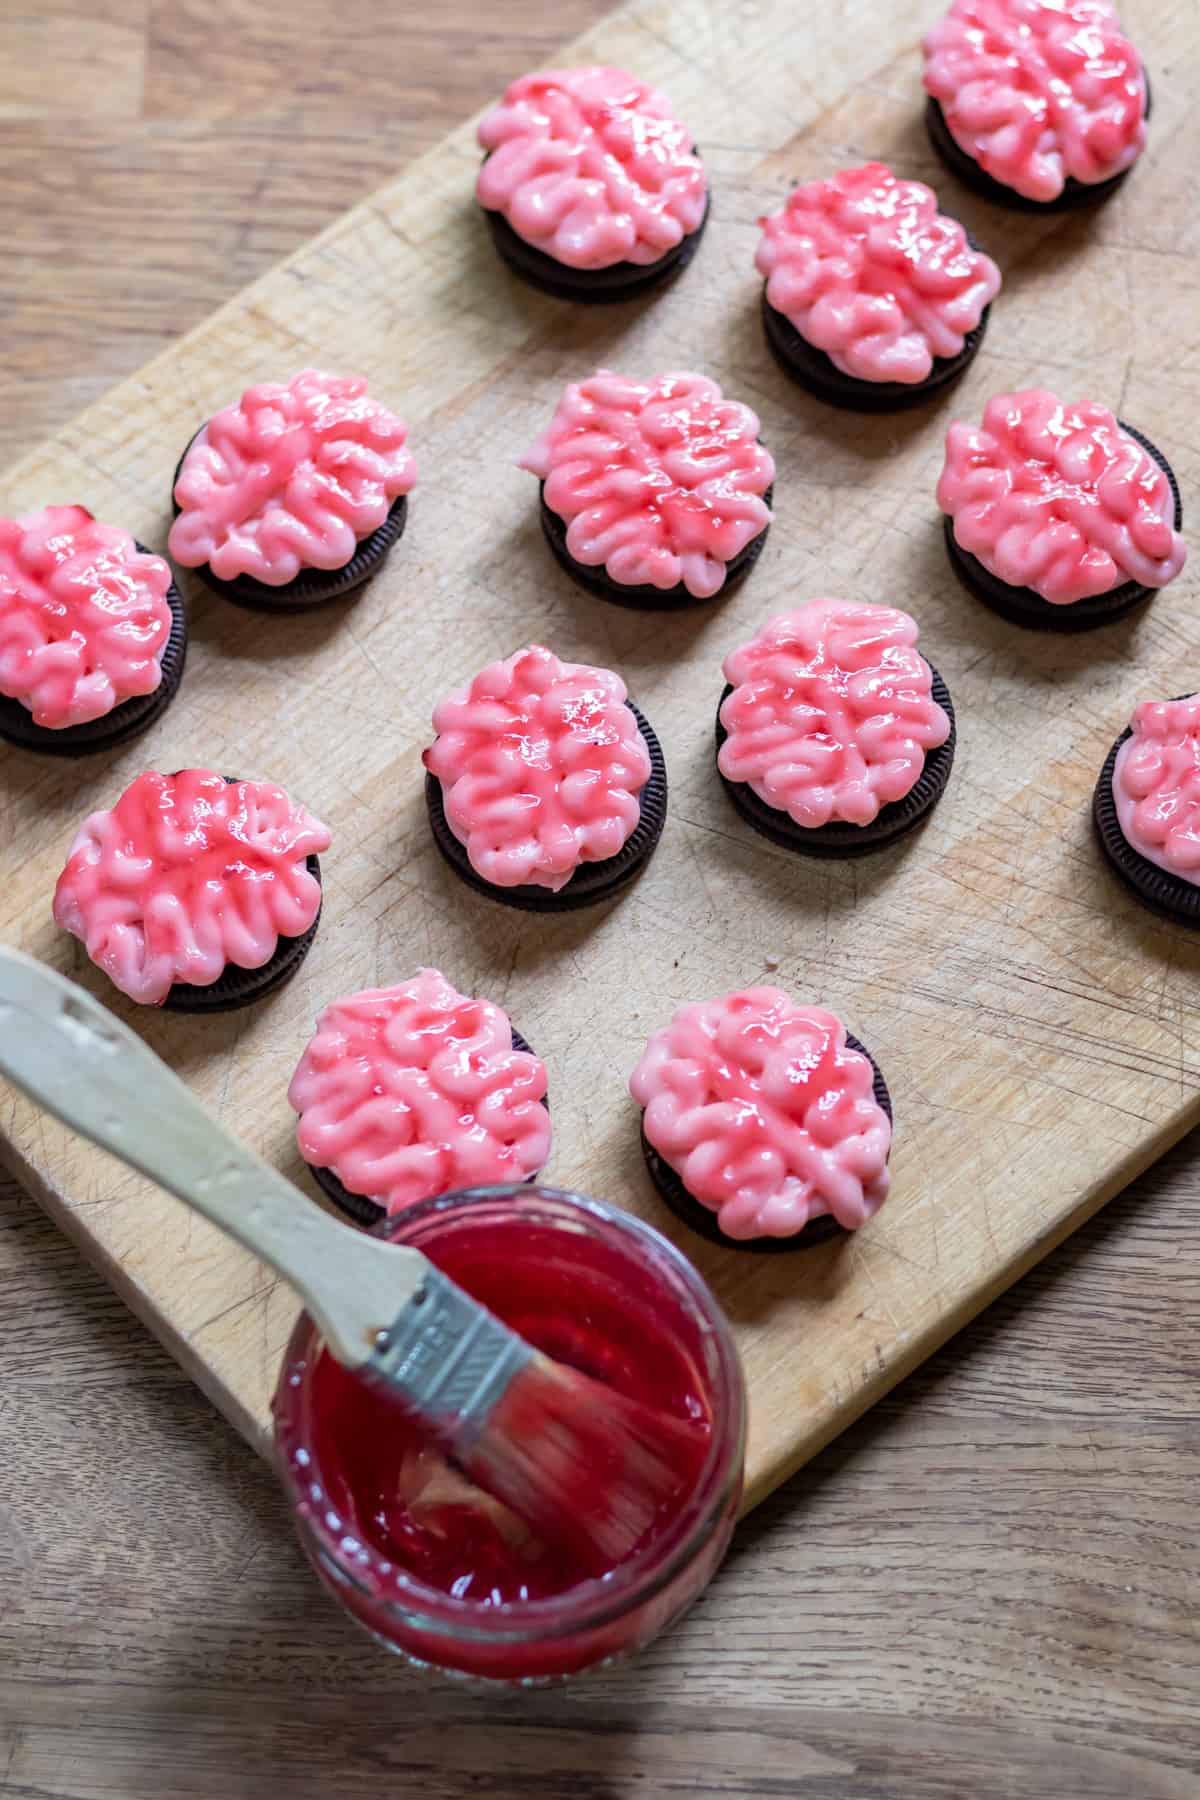 Brushing the 'brain' frosted cookies with jelly.